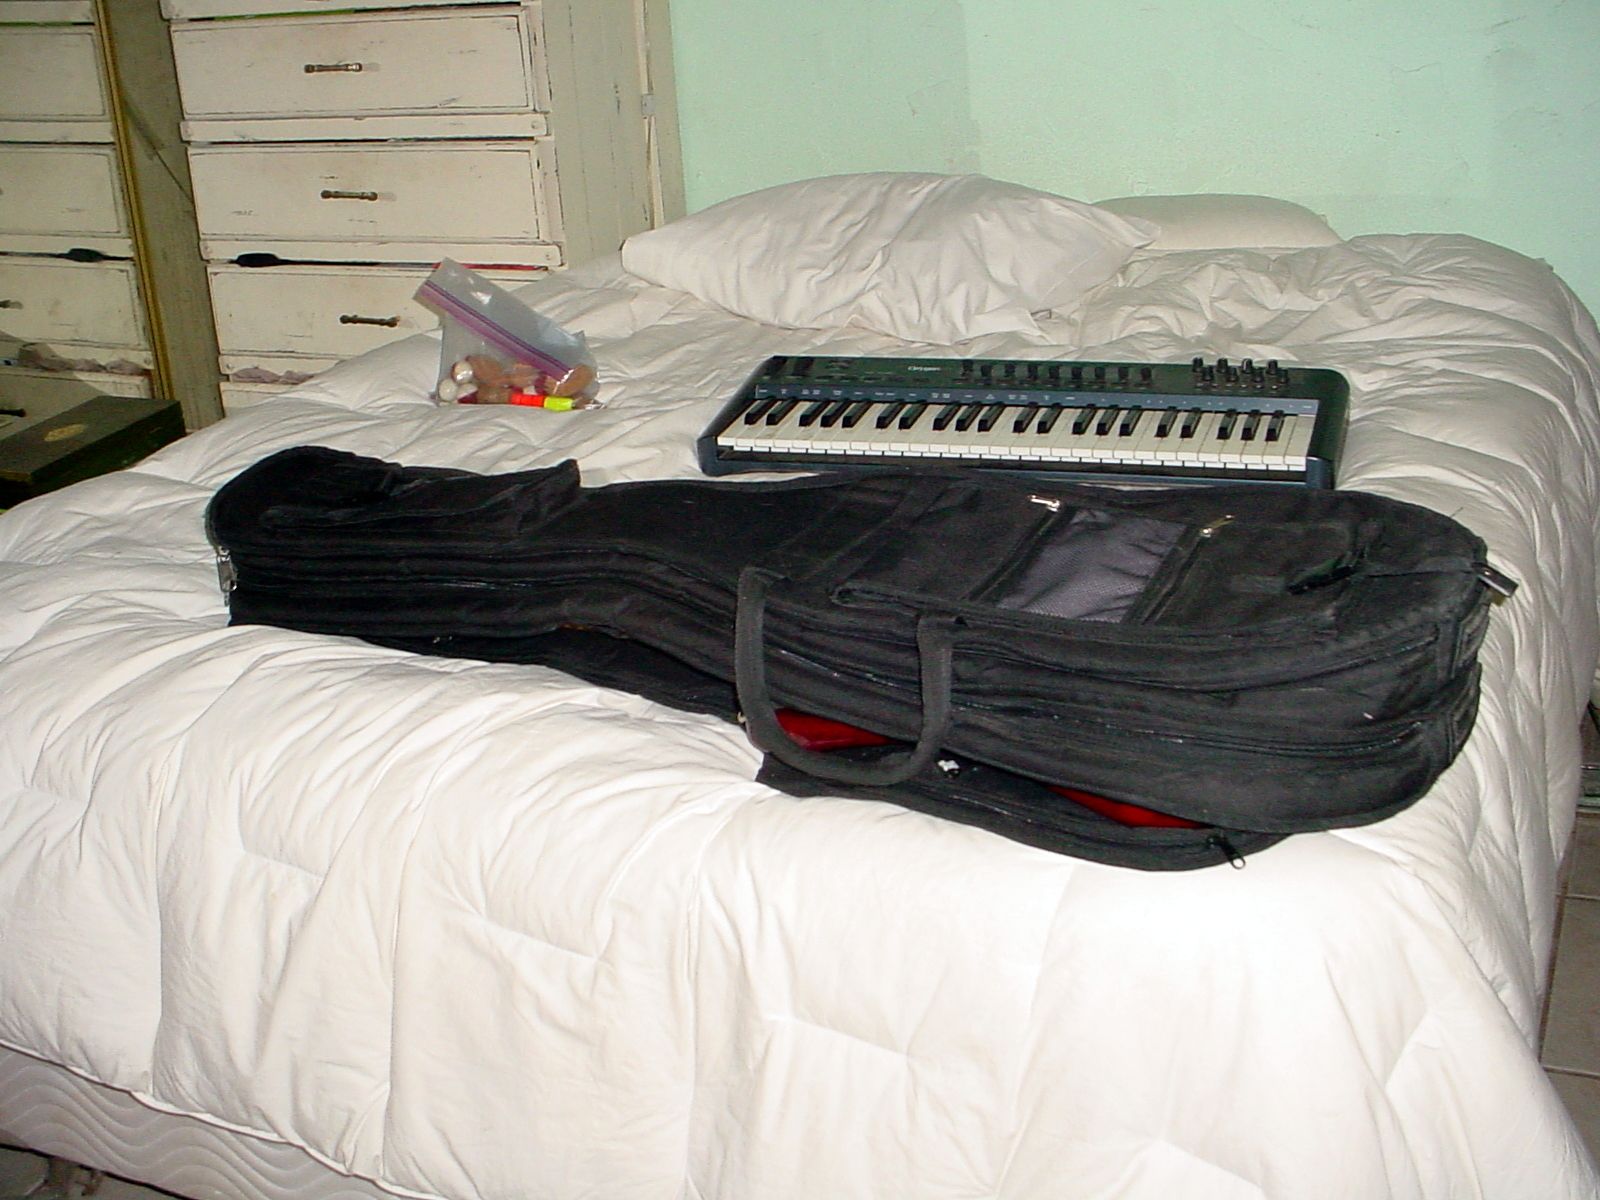 BASS GUITAR CASE WHICH HOLDS 2 BASS GUITARS WITH HEAVY ZIPPERS